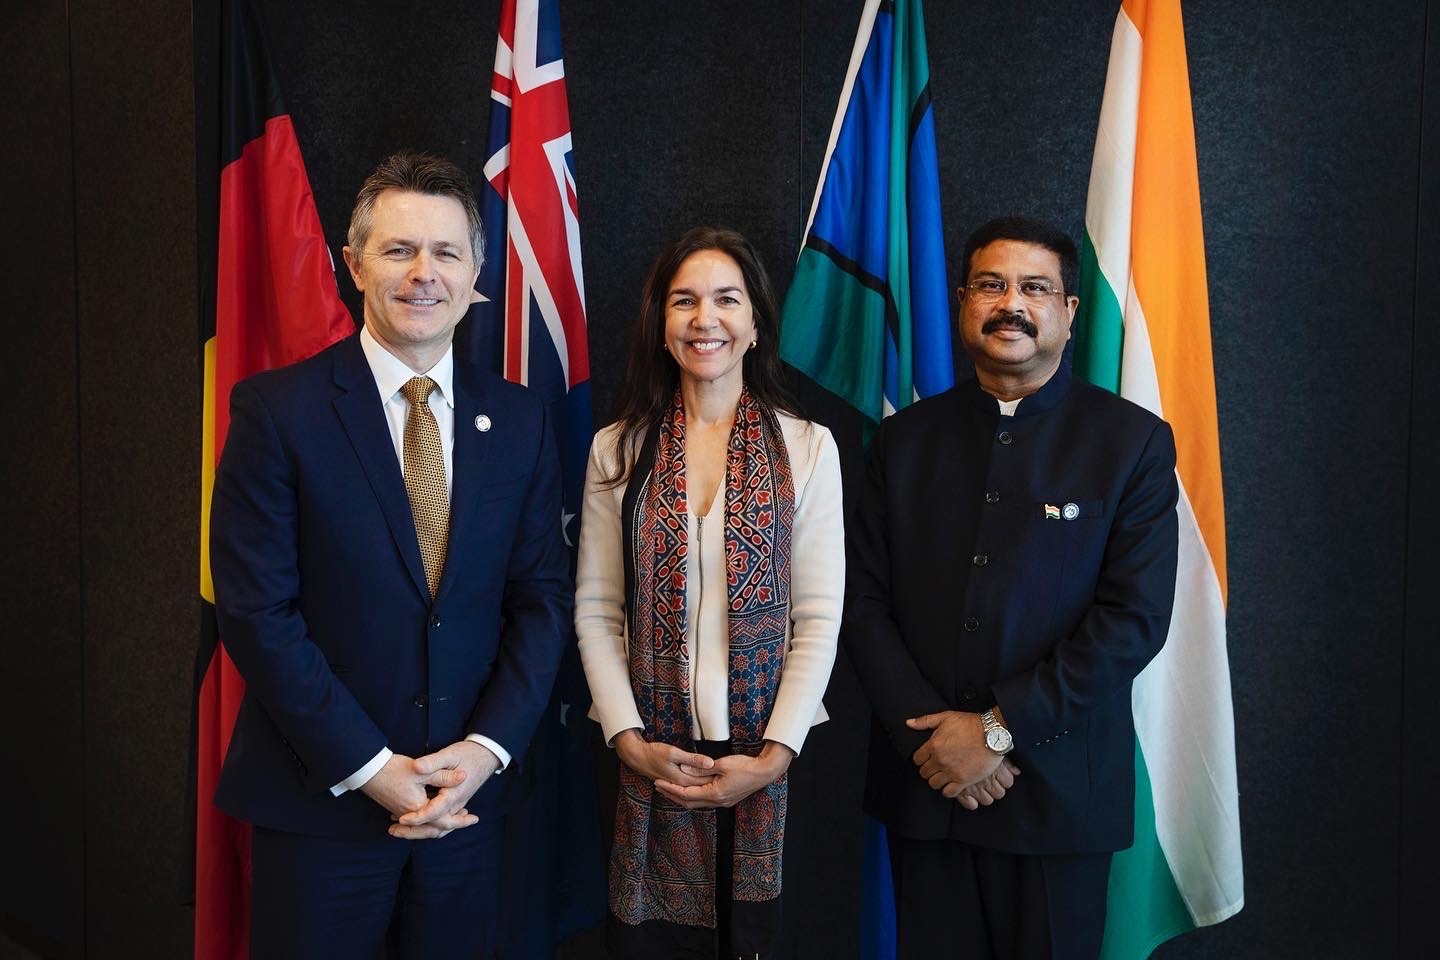 MEDIA RELEASE: Launch of two research programs to strengthen Australia-India ties